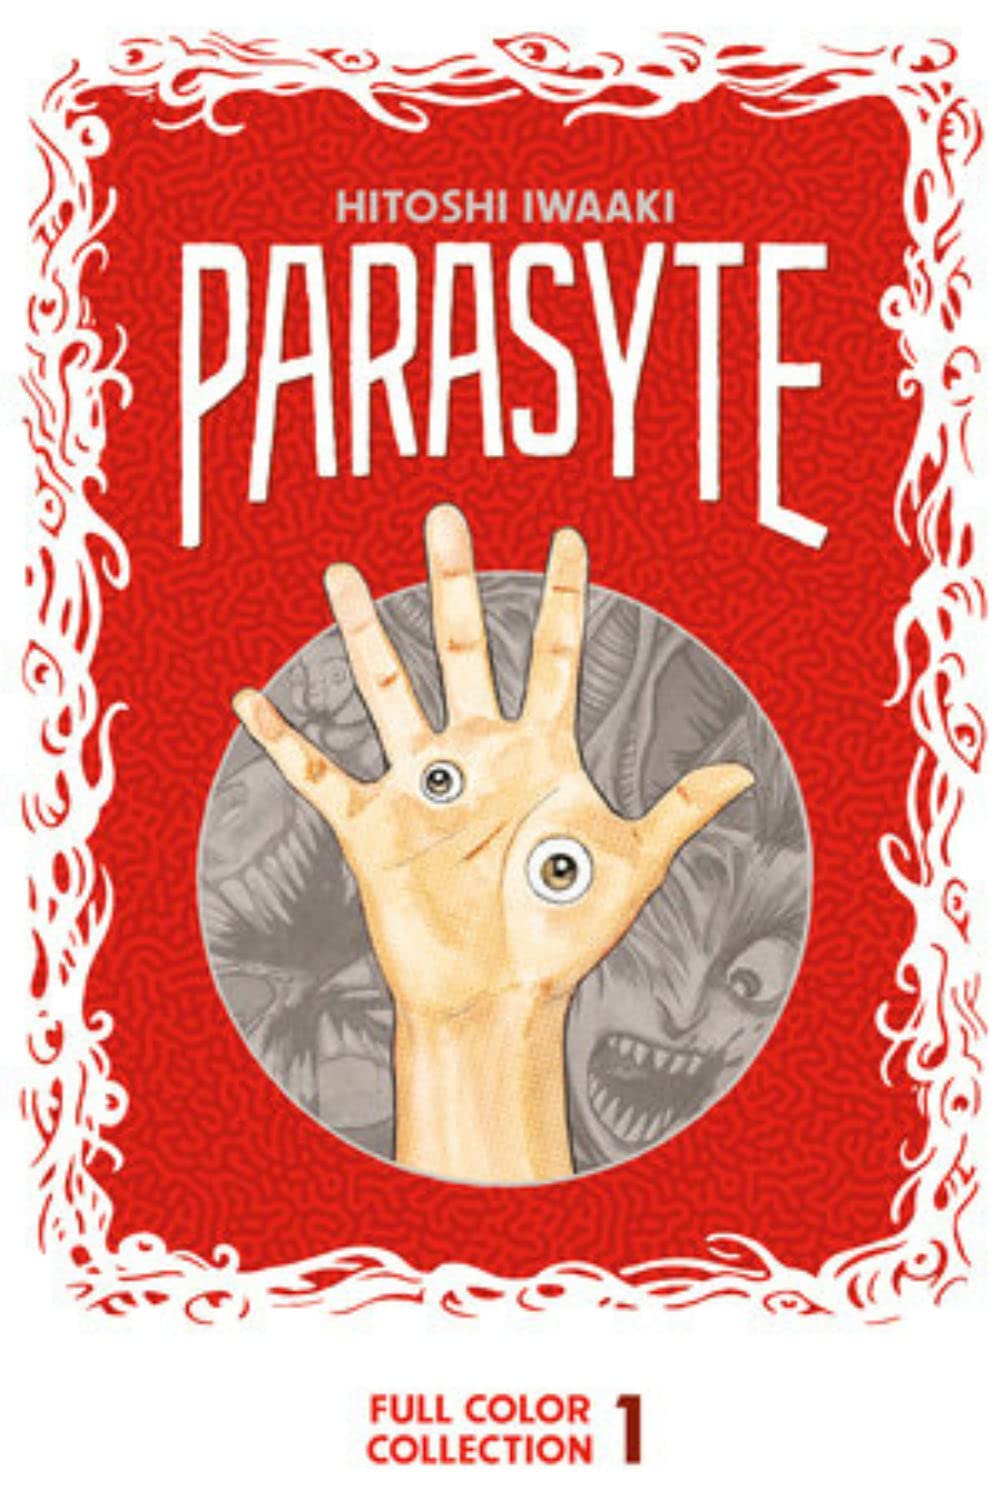 Parasyte 1: Full Color Collection